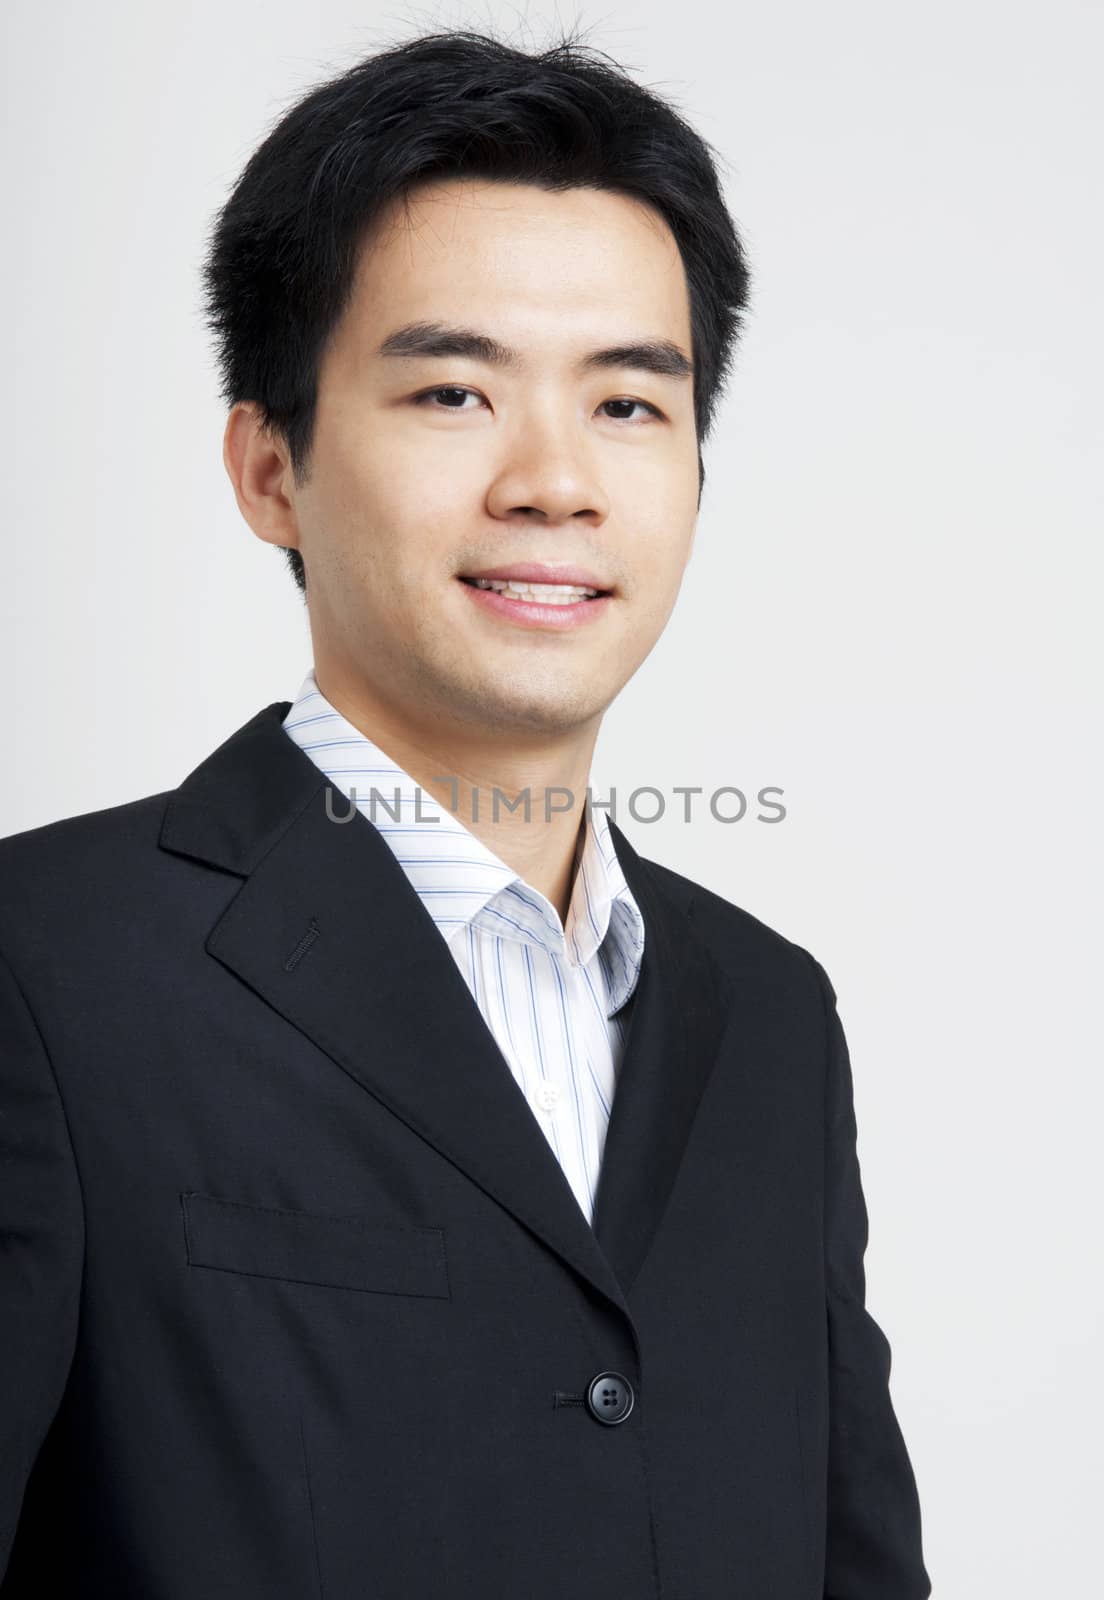 Portrait of young Asian executive in black suit